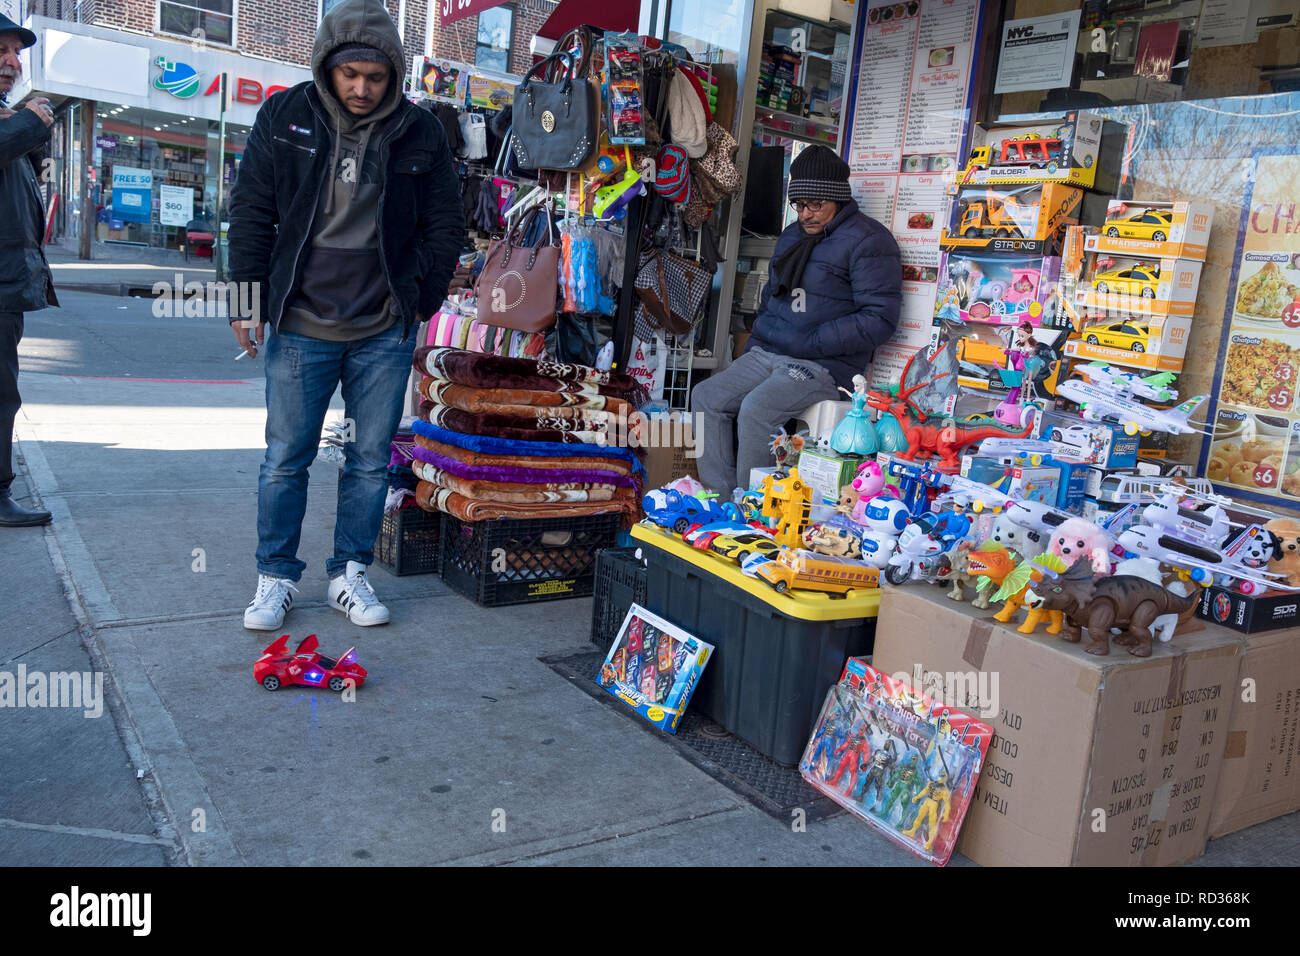 A street scene in Jackson Heights, Queens with a merchant and a young man looking a t a wind-up race car. Stock Photo